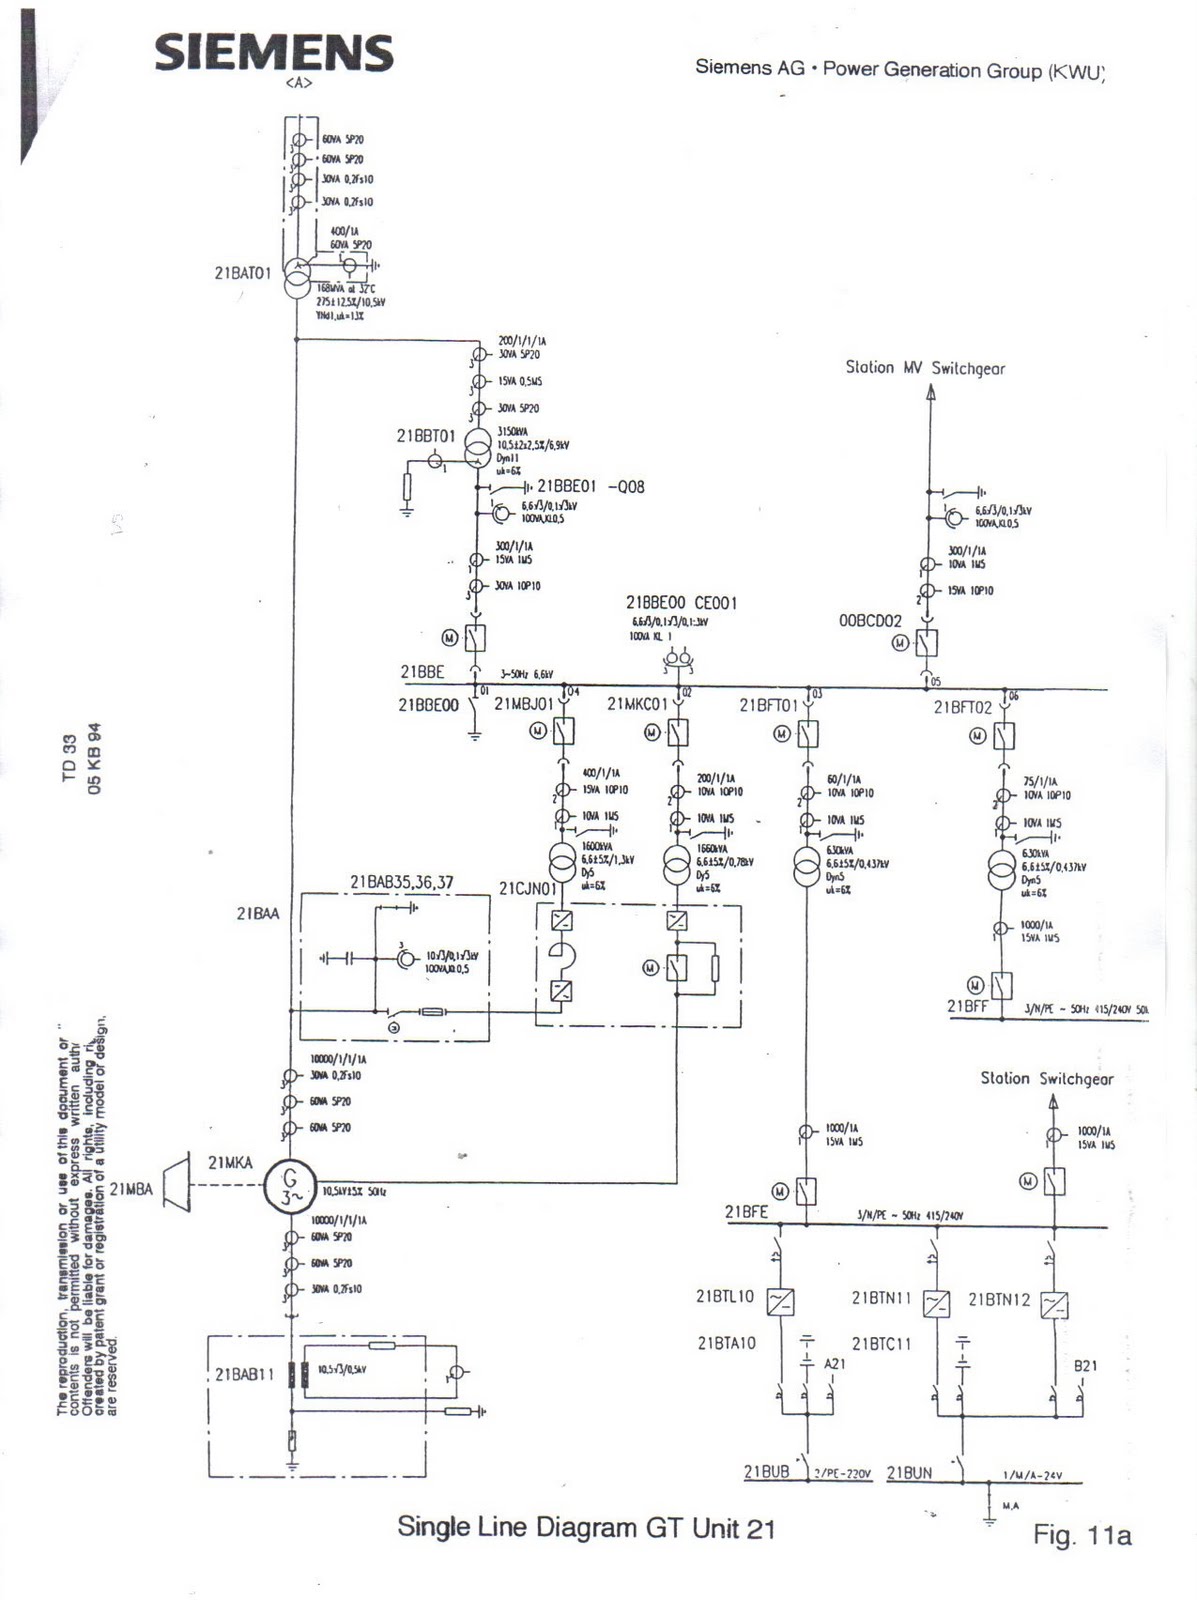 Single Line Diagram of Power System - All about Electrical